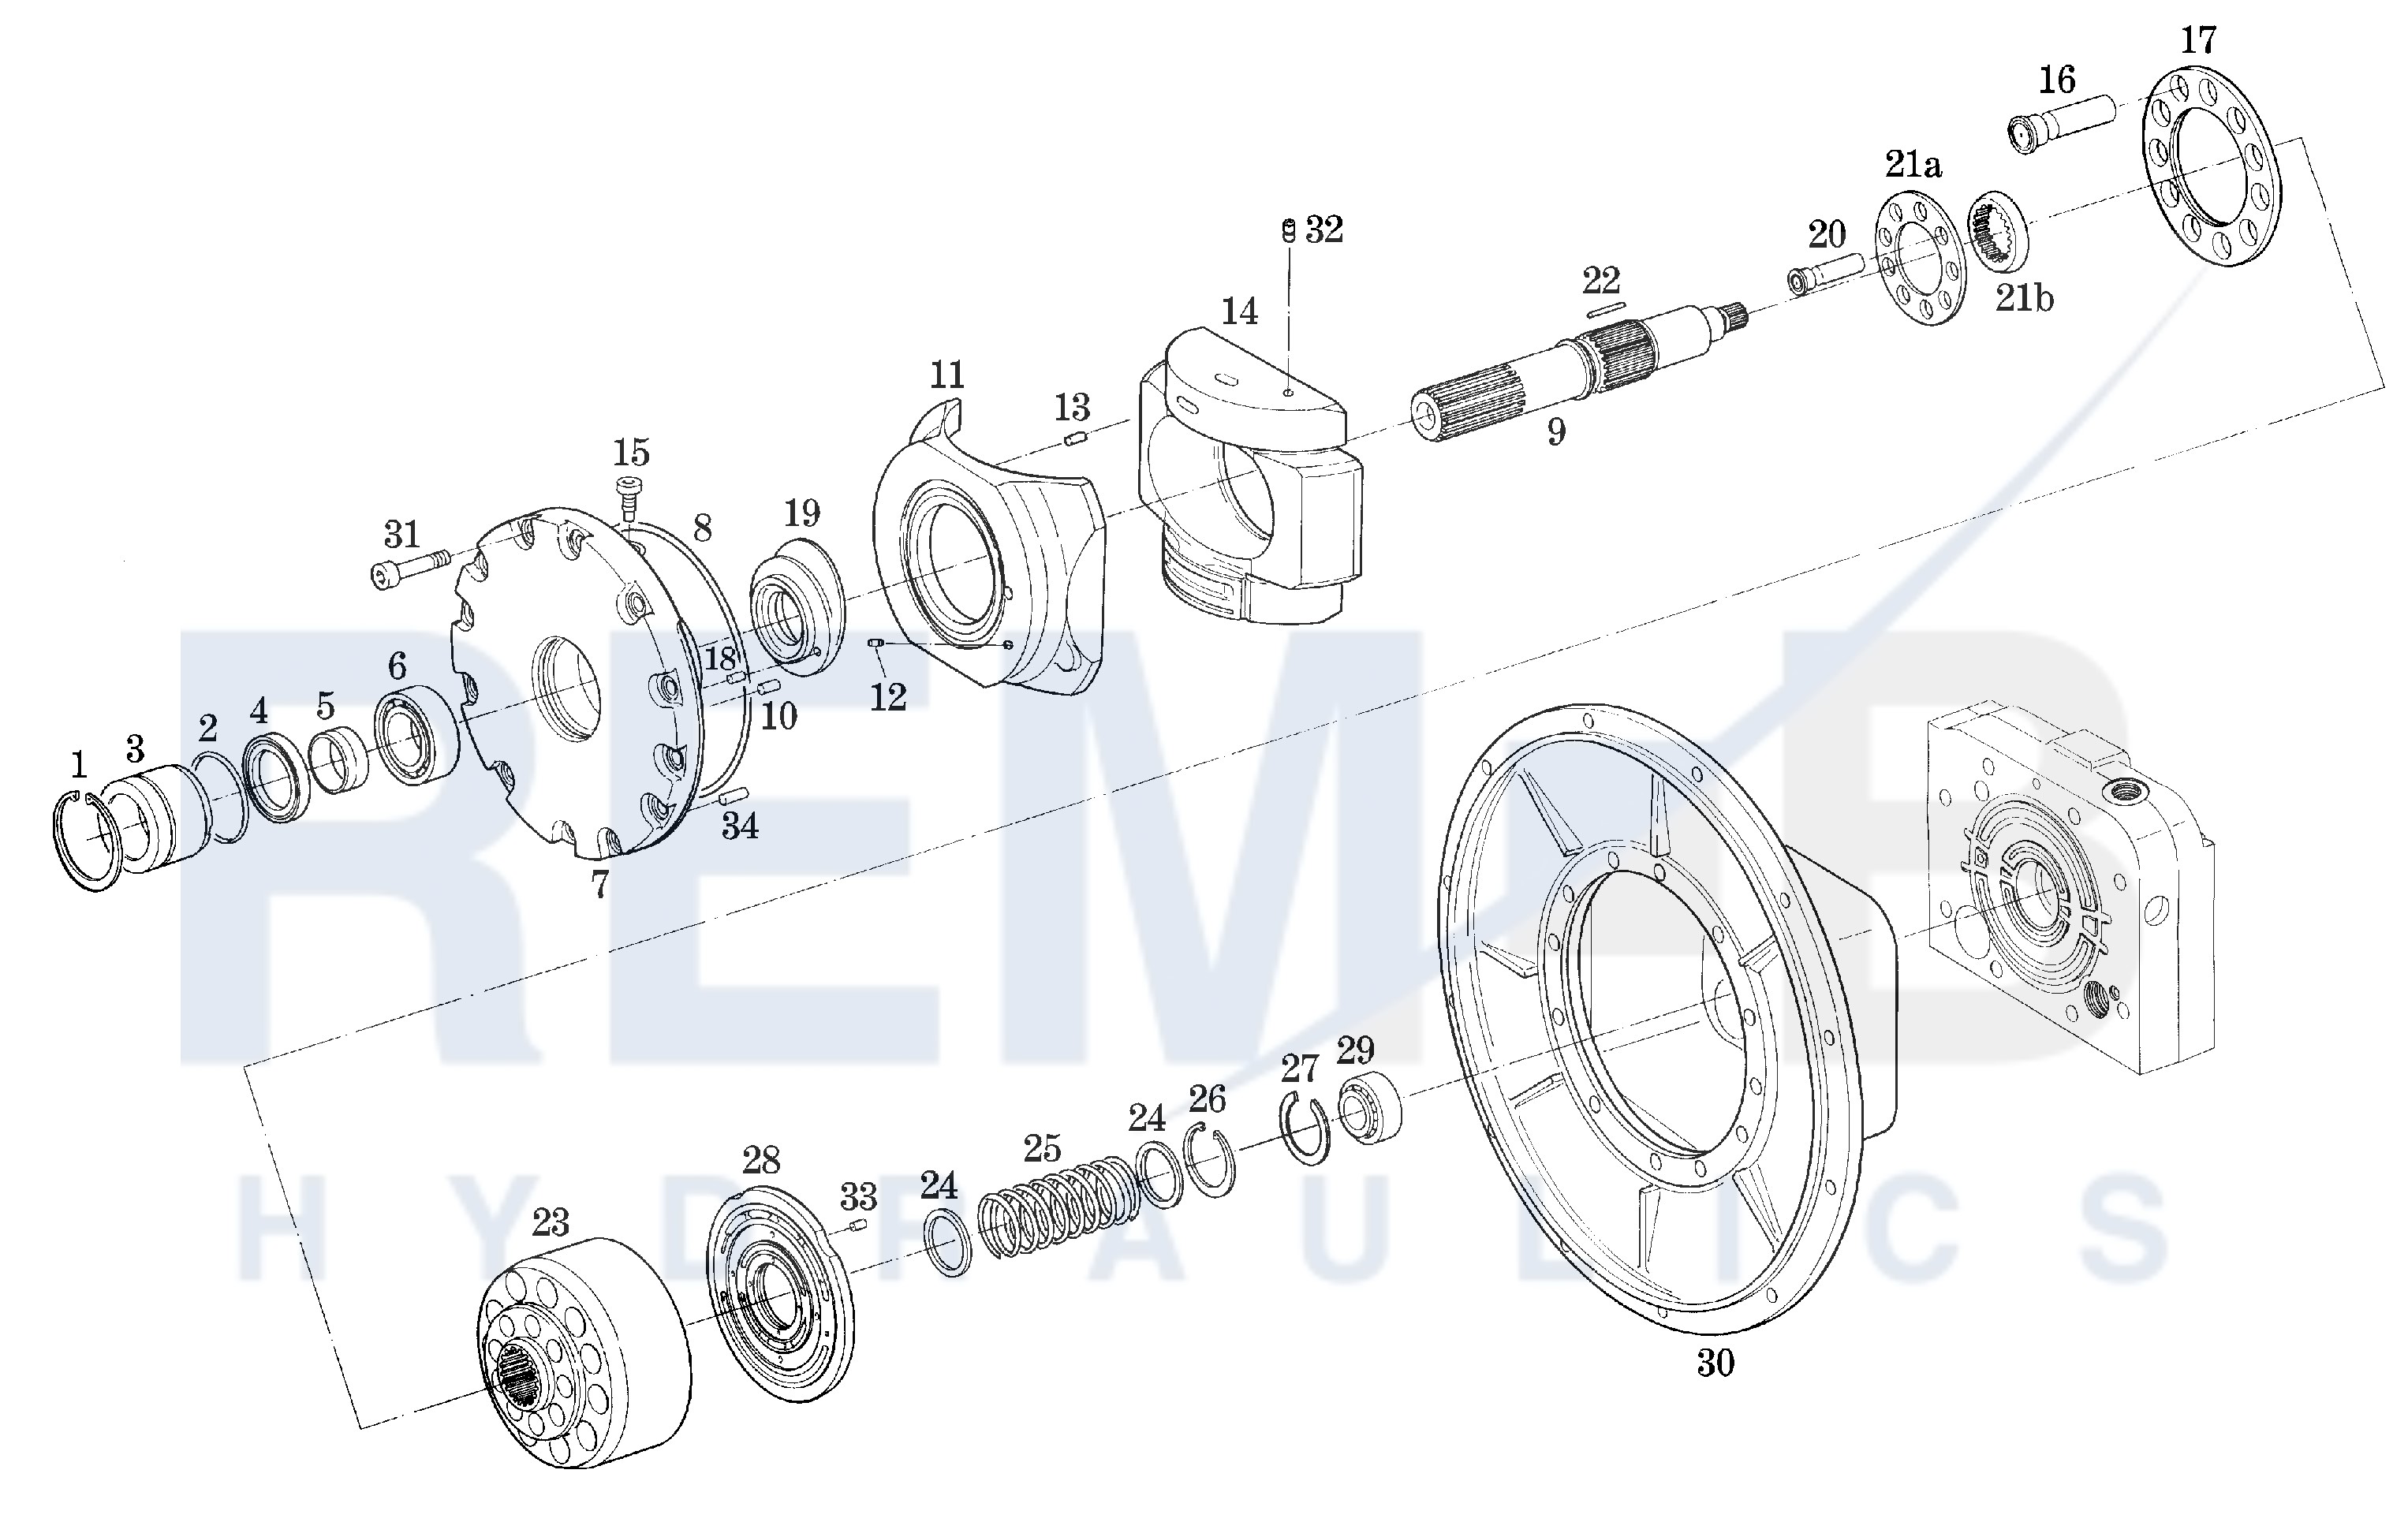 DRIVE SHAFT, CRADLE, PORT PLATE AND HOUSING